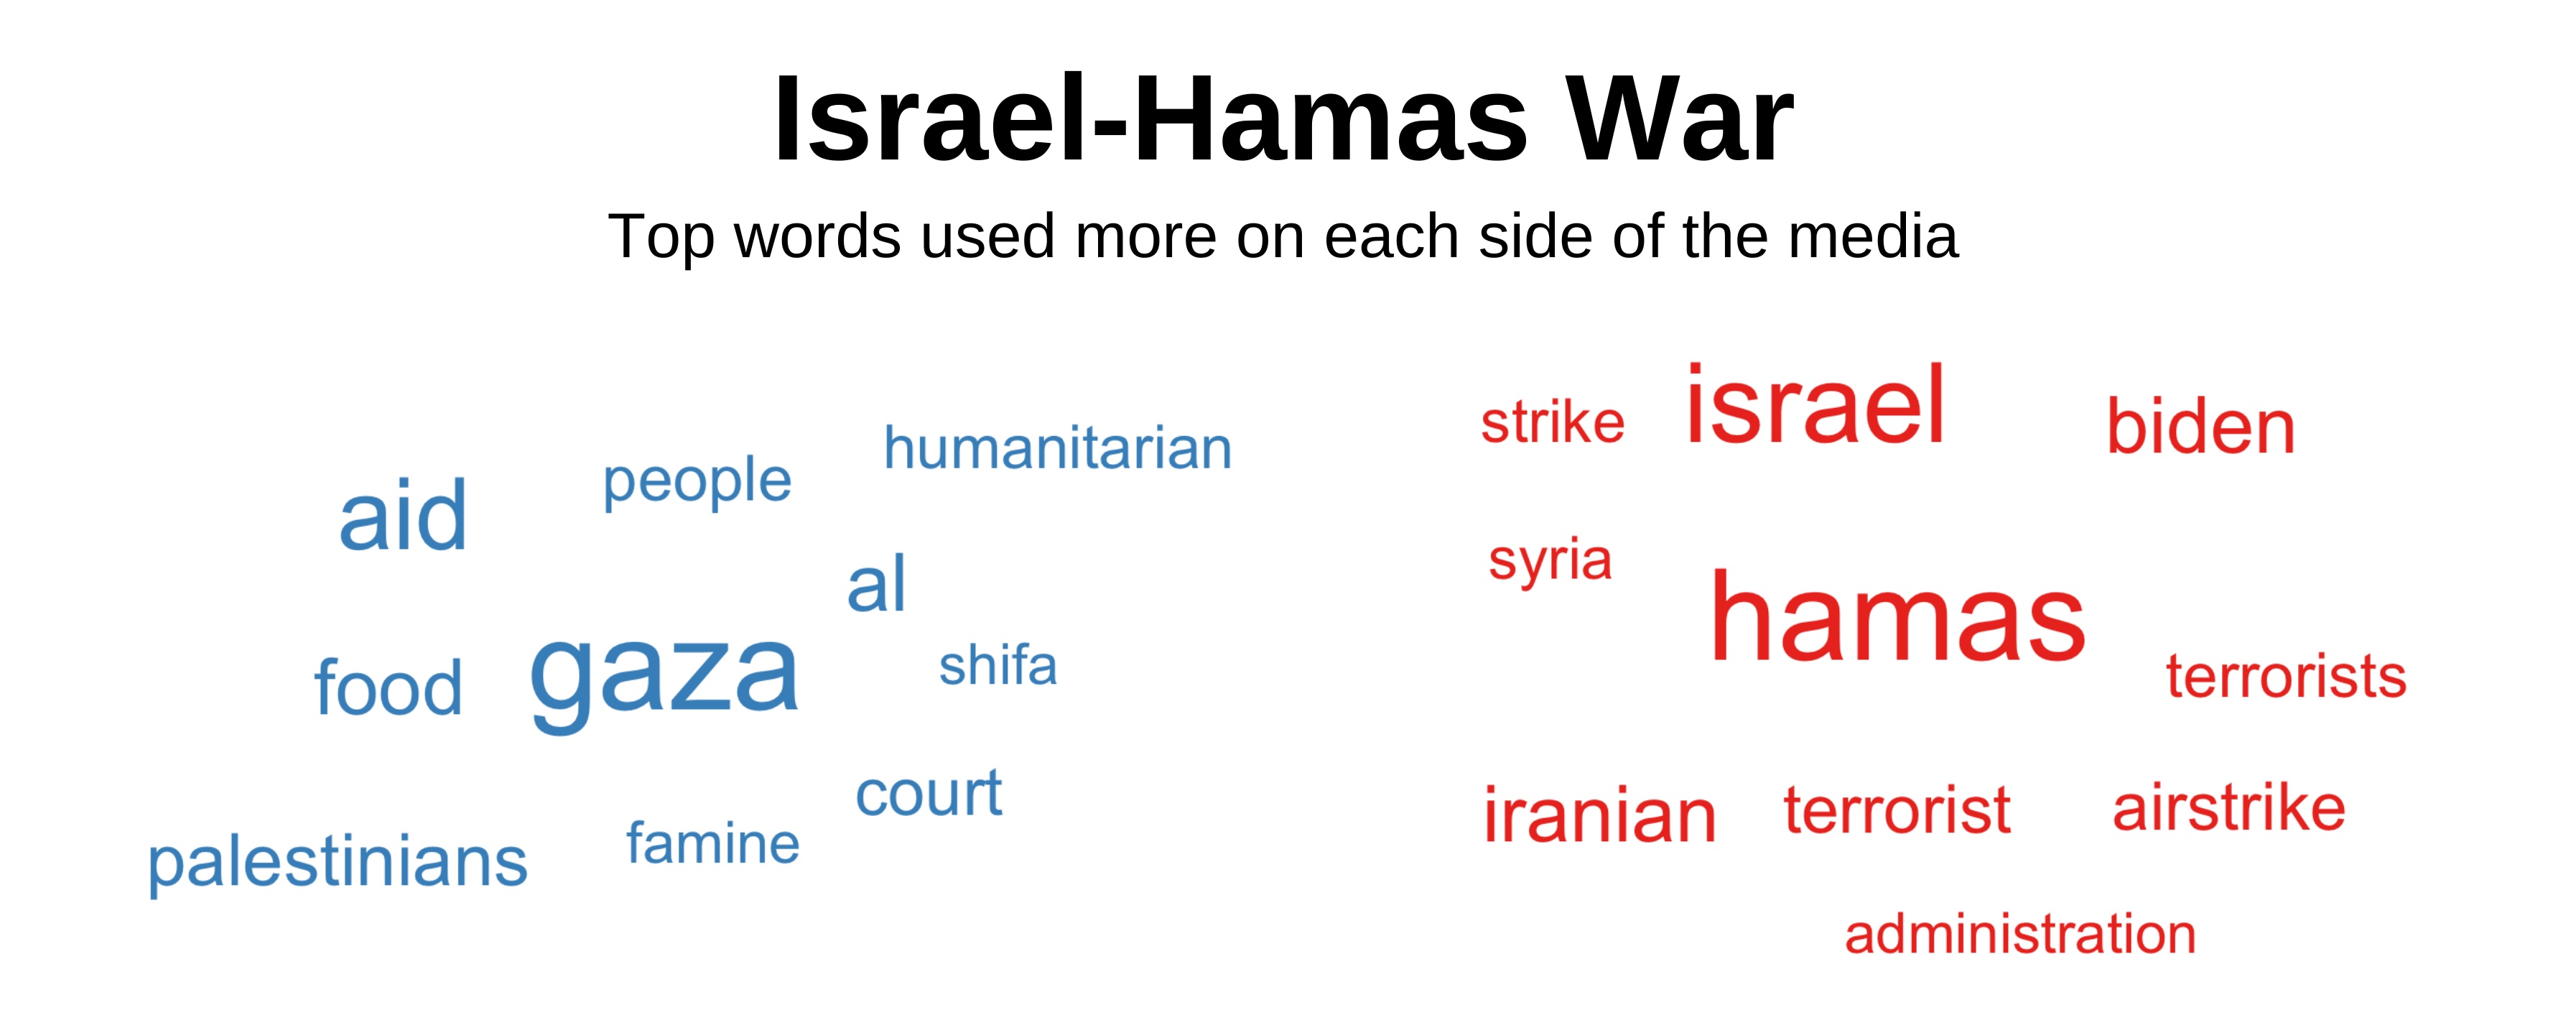 Top words about the Israel-Hamas conflict used more on each side of the media.